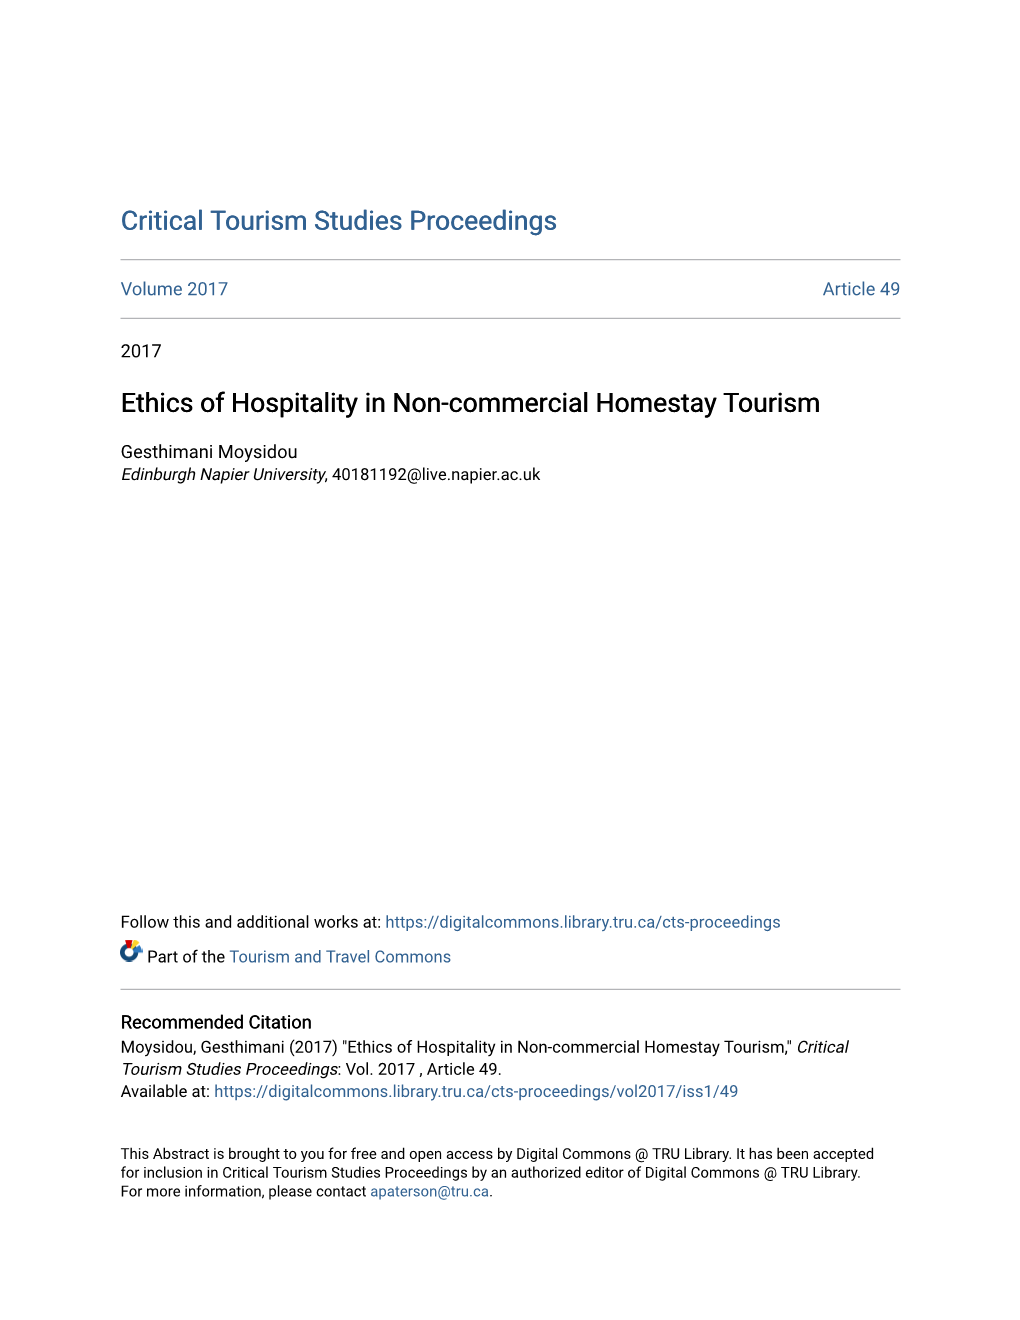 Ethics of Hospitality in Non-Commercial Homestay Tourism